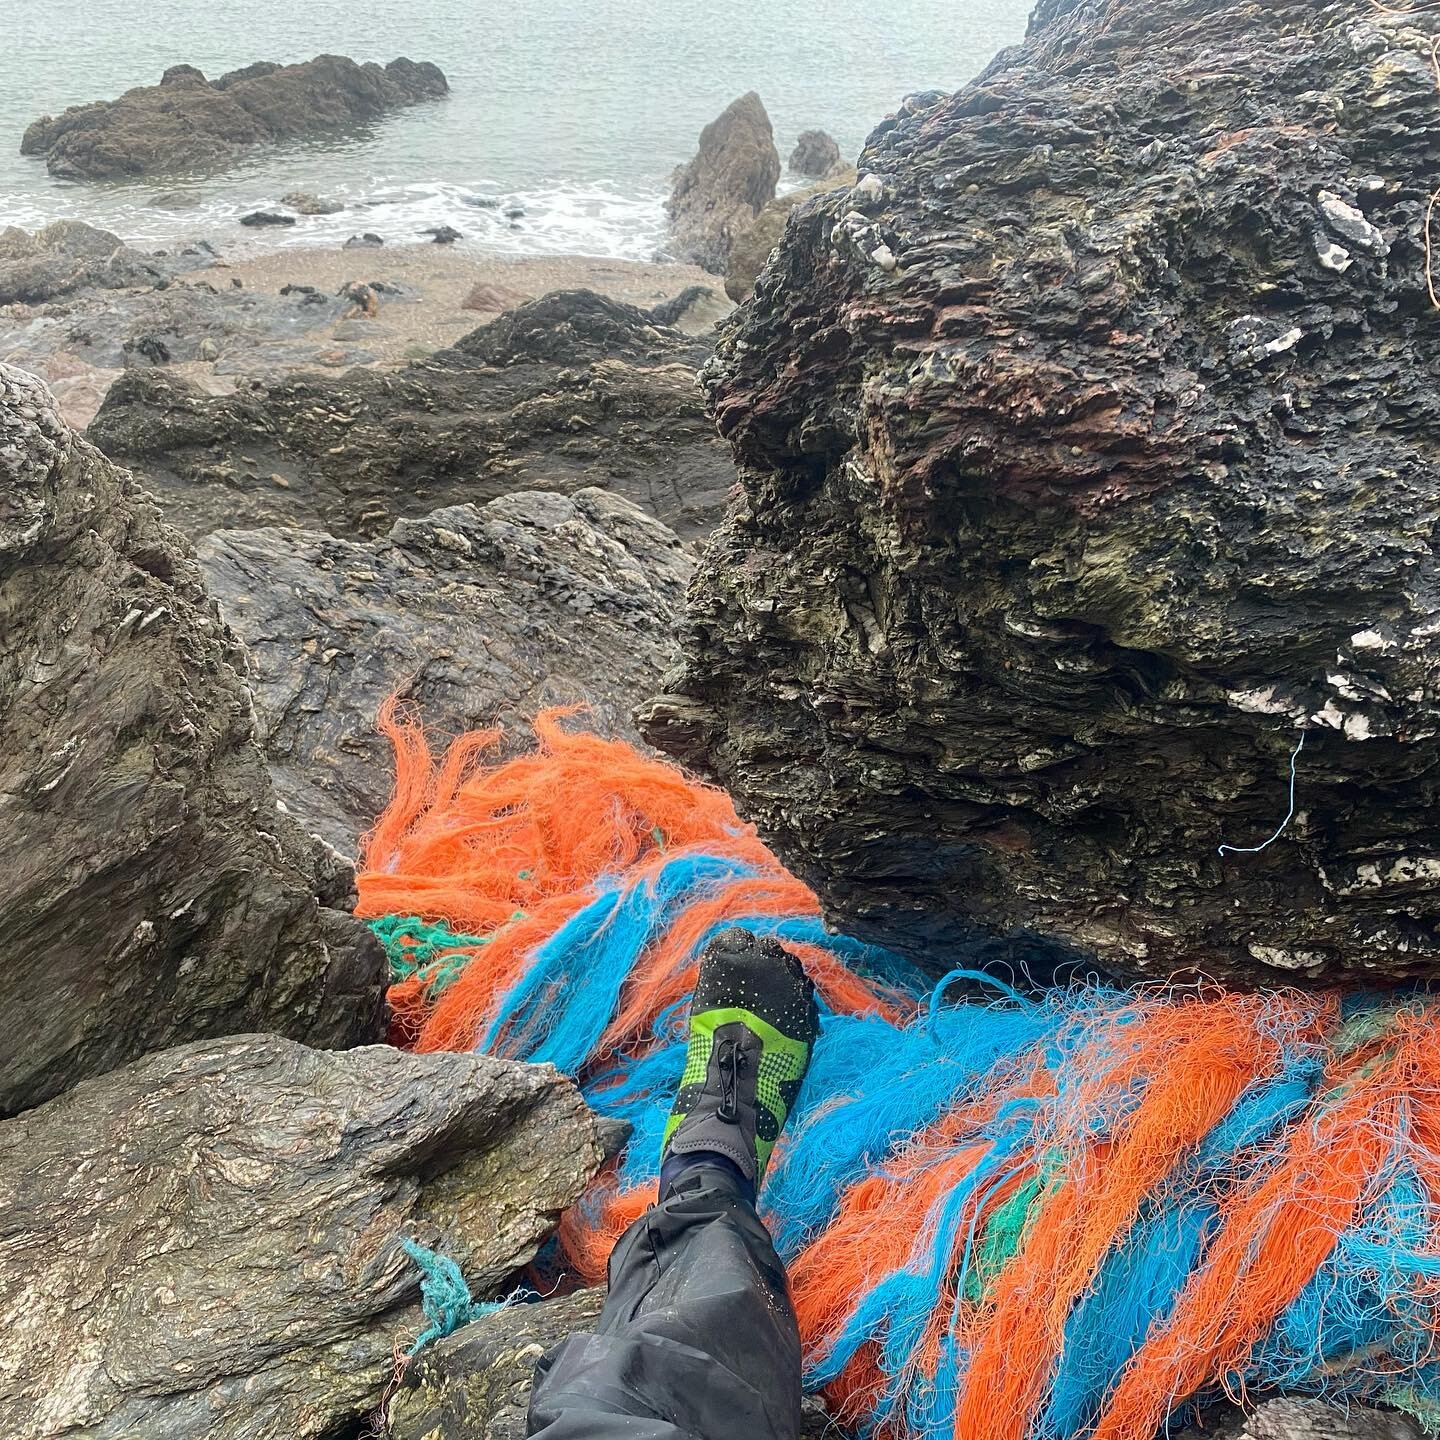 Take care If you are out on the coast this weekend folks, big seas from strong Sou Wester crunching our shores. If you find any large items of plastic flotsam or jetsam that need removing please let us know &amp; we will endeavour to retrieve 👍🐳😀